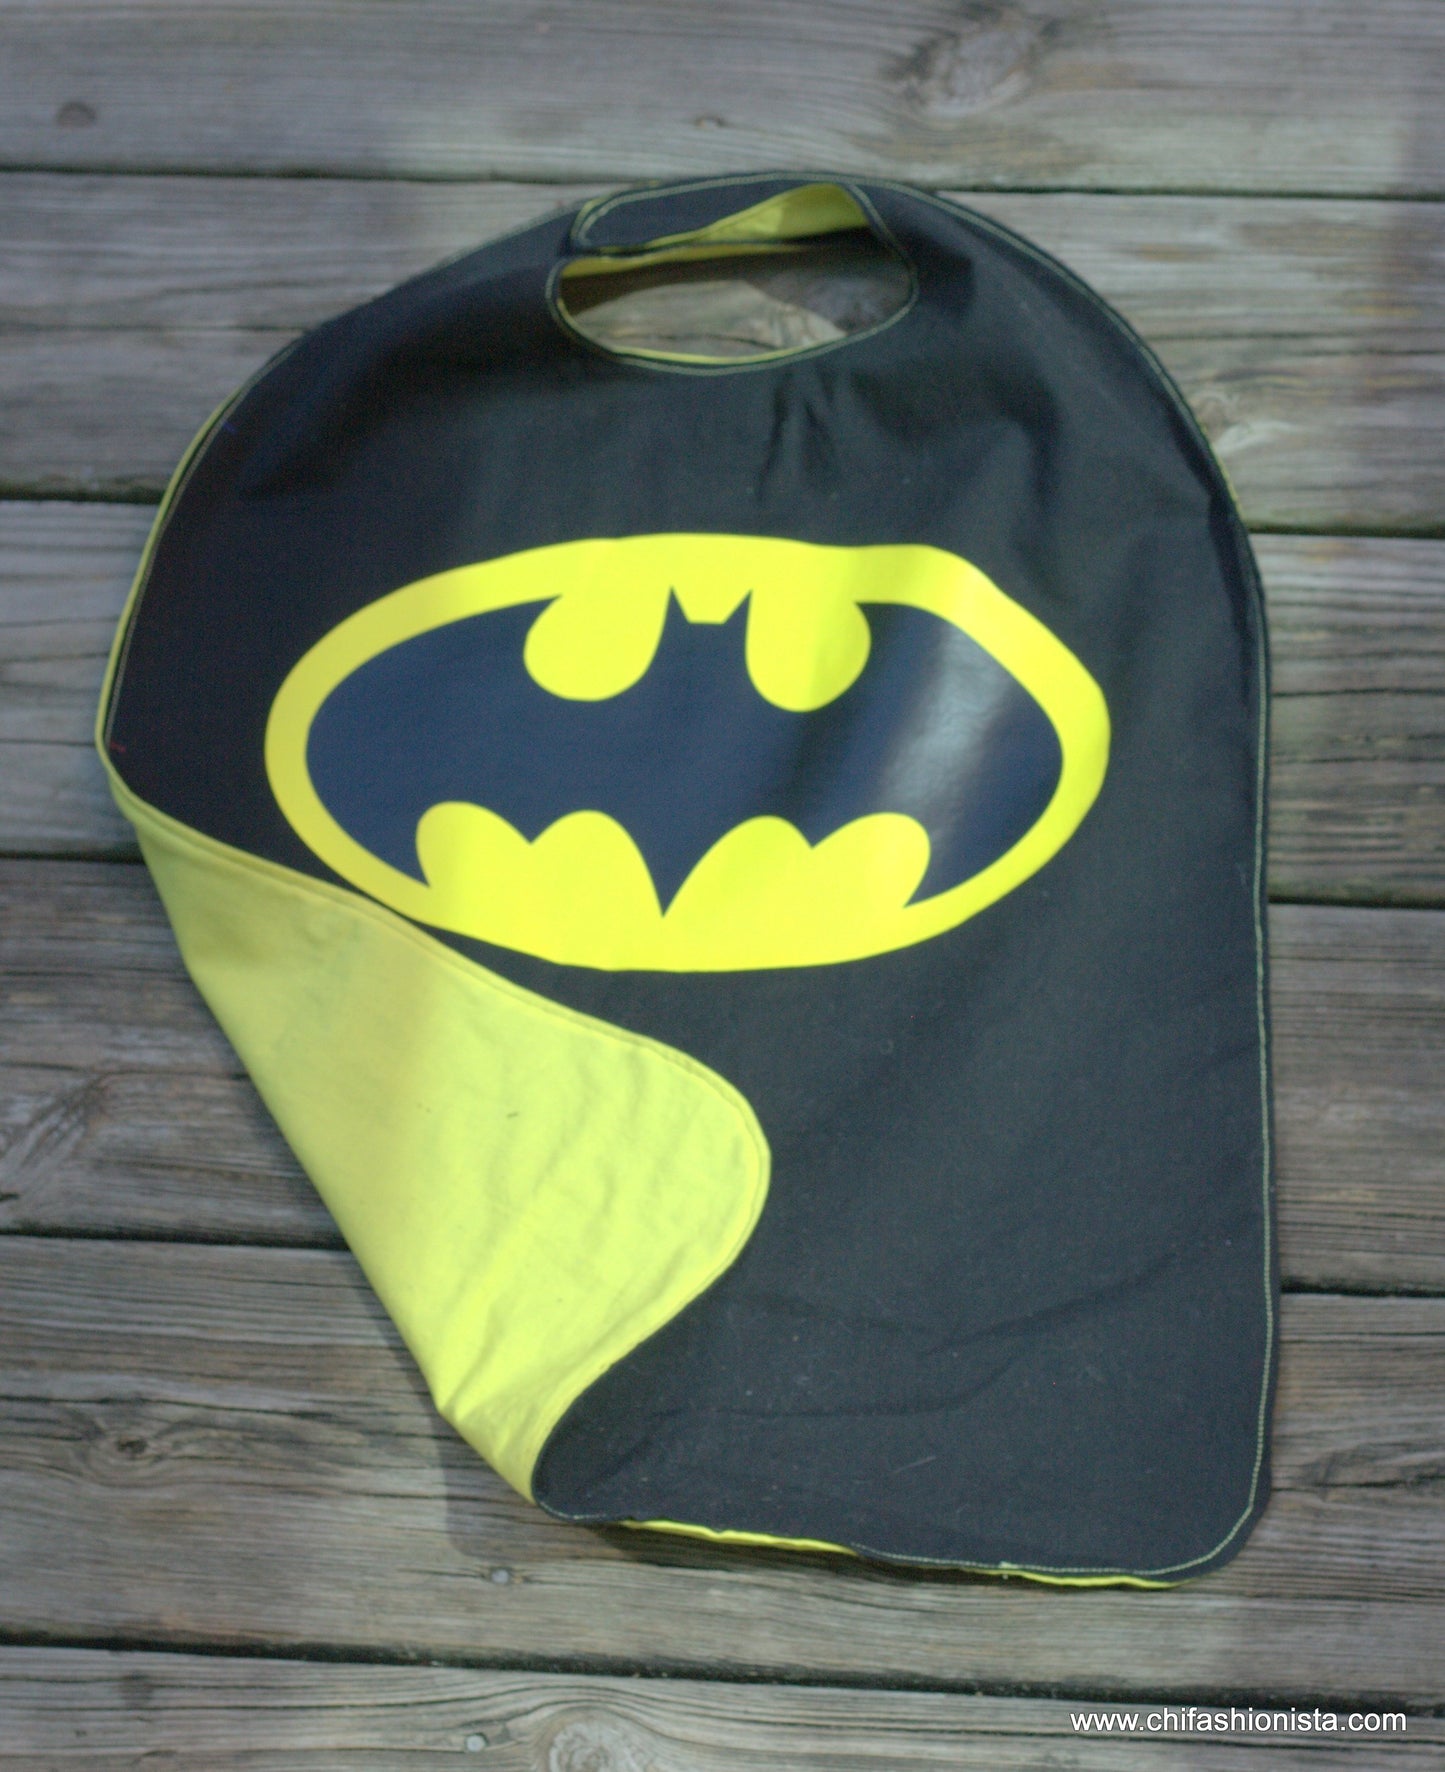 Handcrafted Children's Clothing, Clothing for Children and Parents, Bat Cape, chi-fashionista